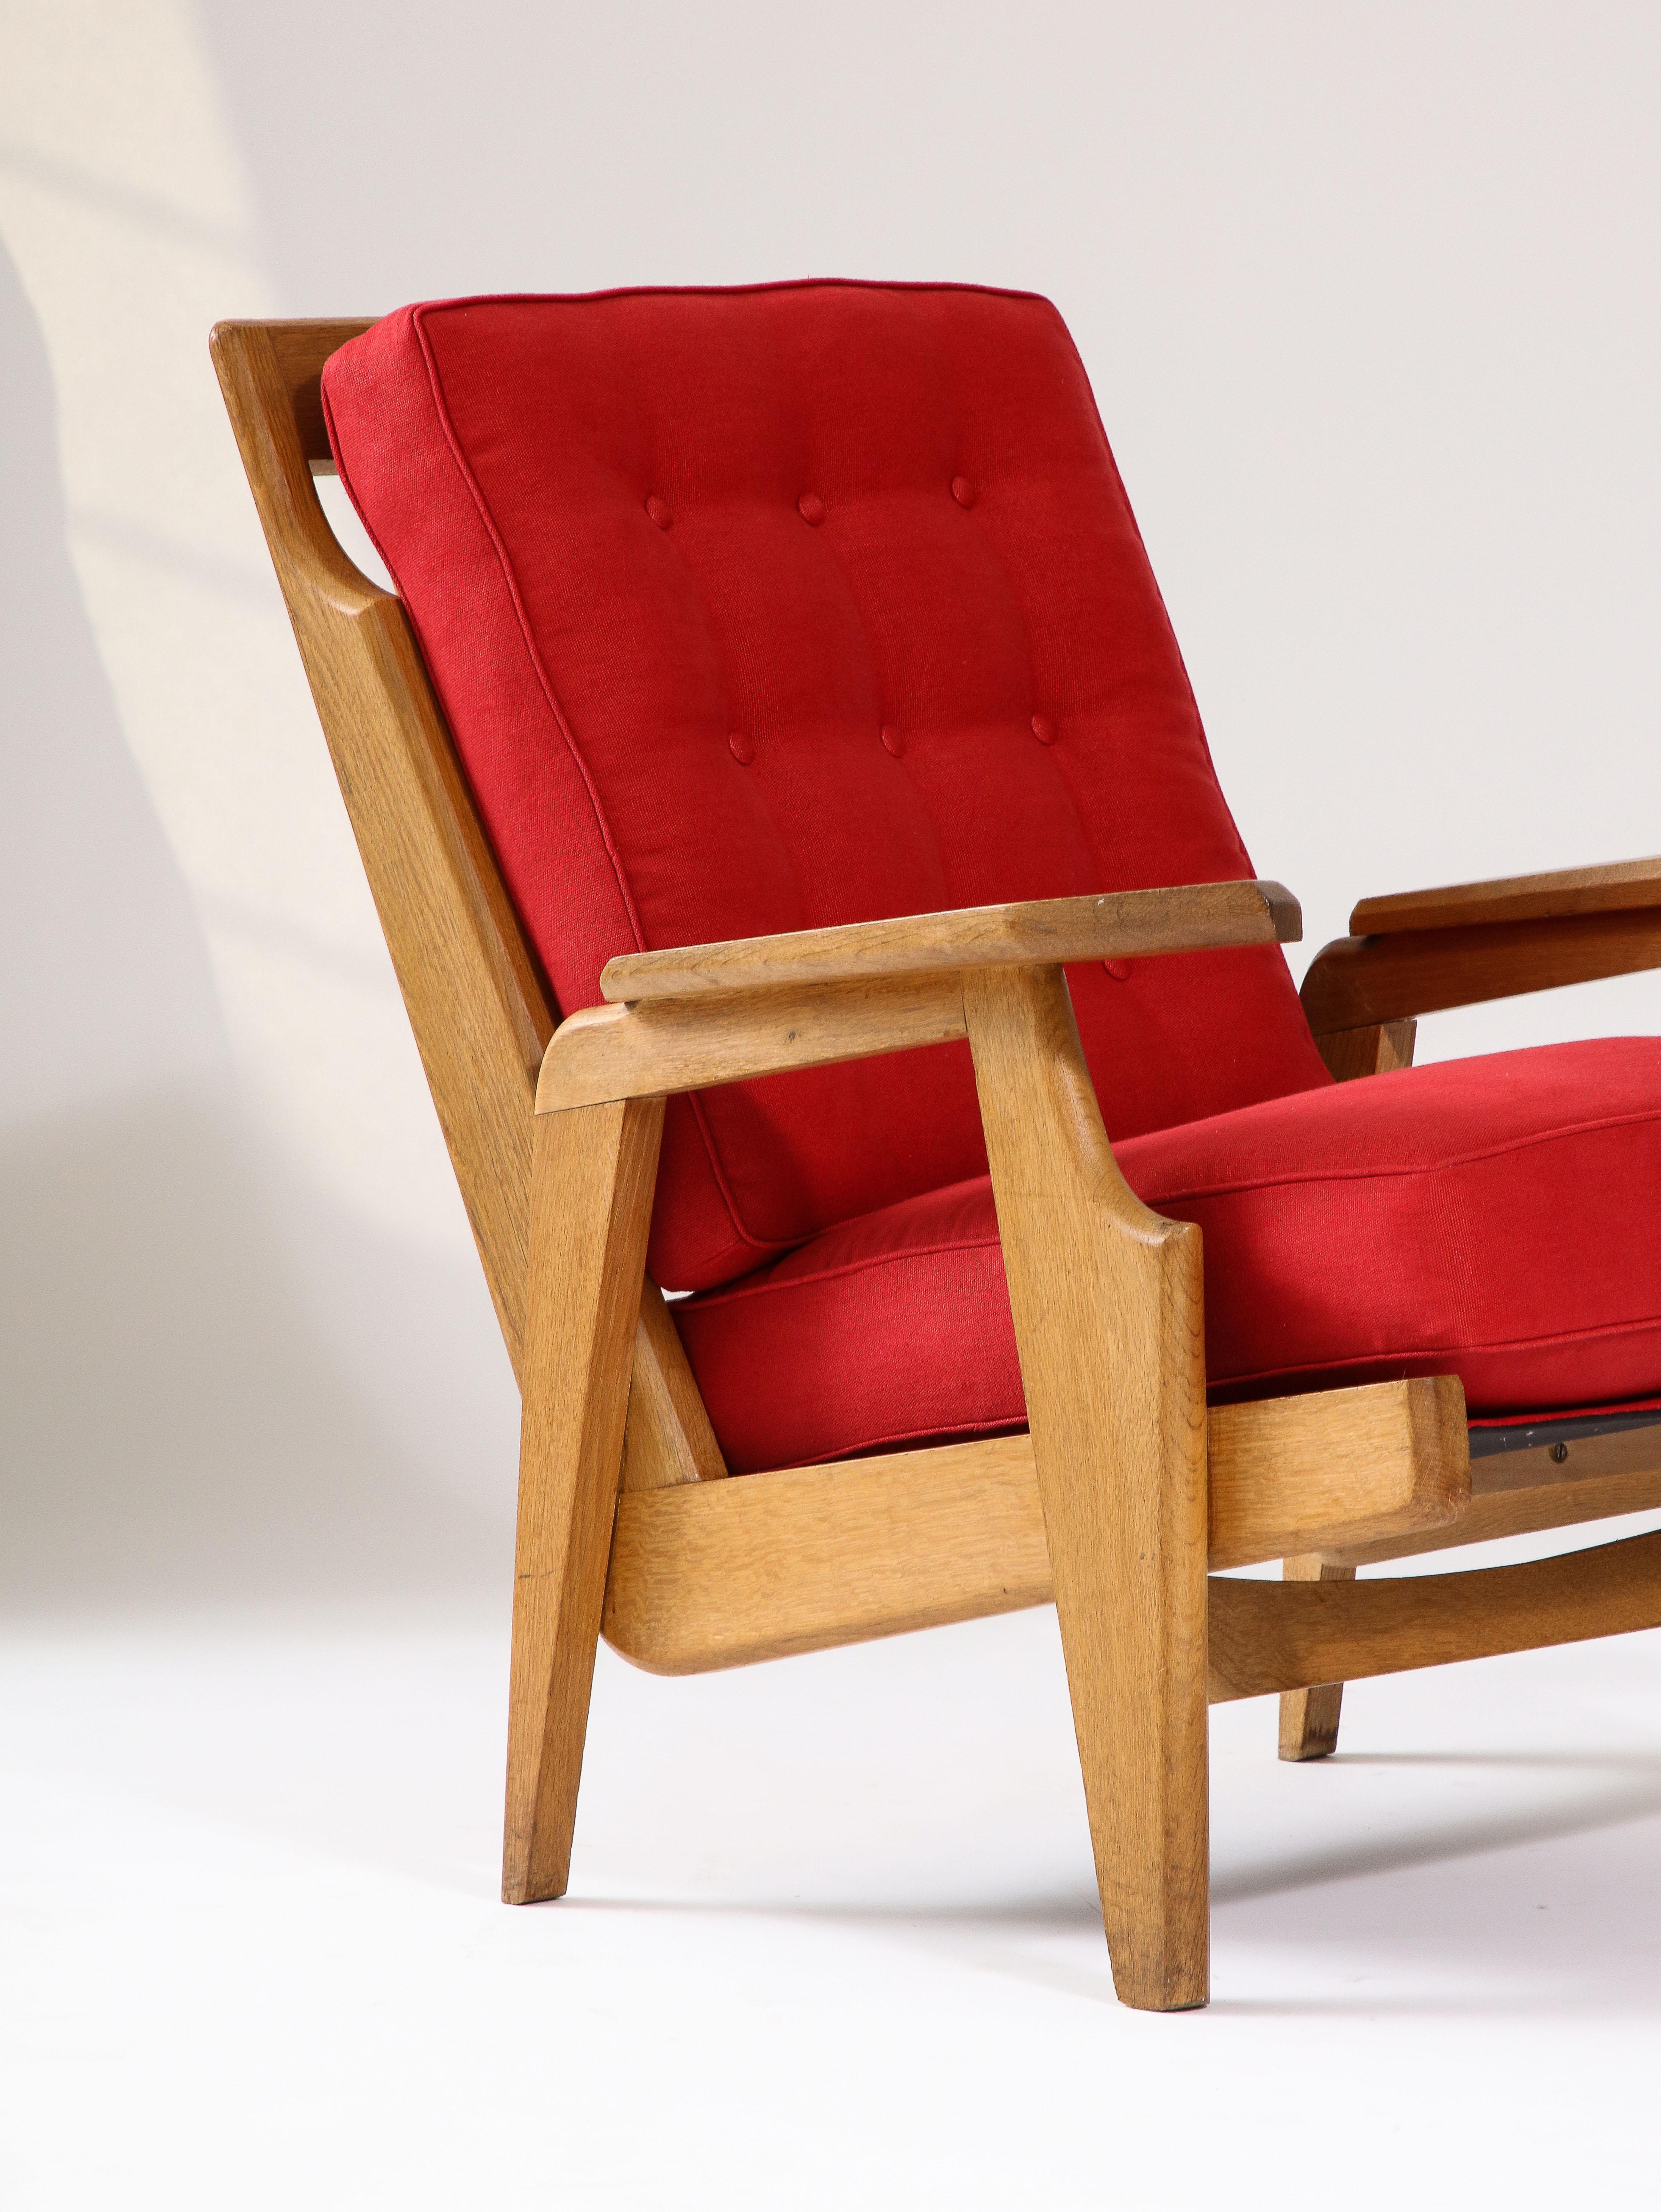 Mid-Century Modern Oak and Upholstery Armchair by Guillerme et Chambron, France, c. 1960 For Sale